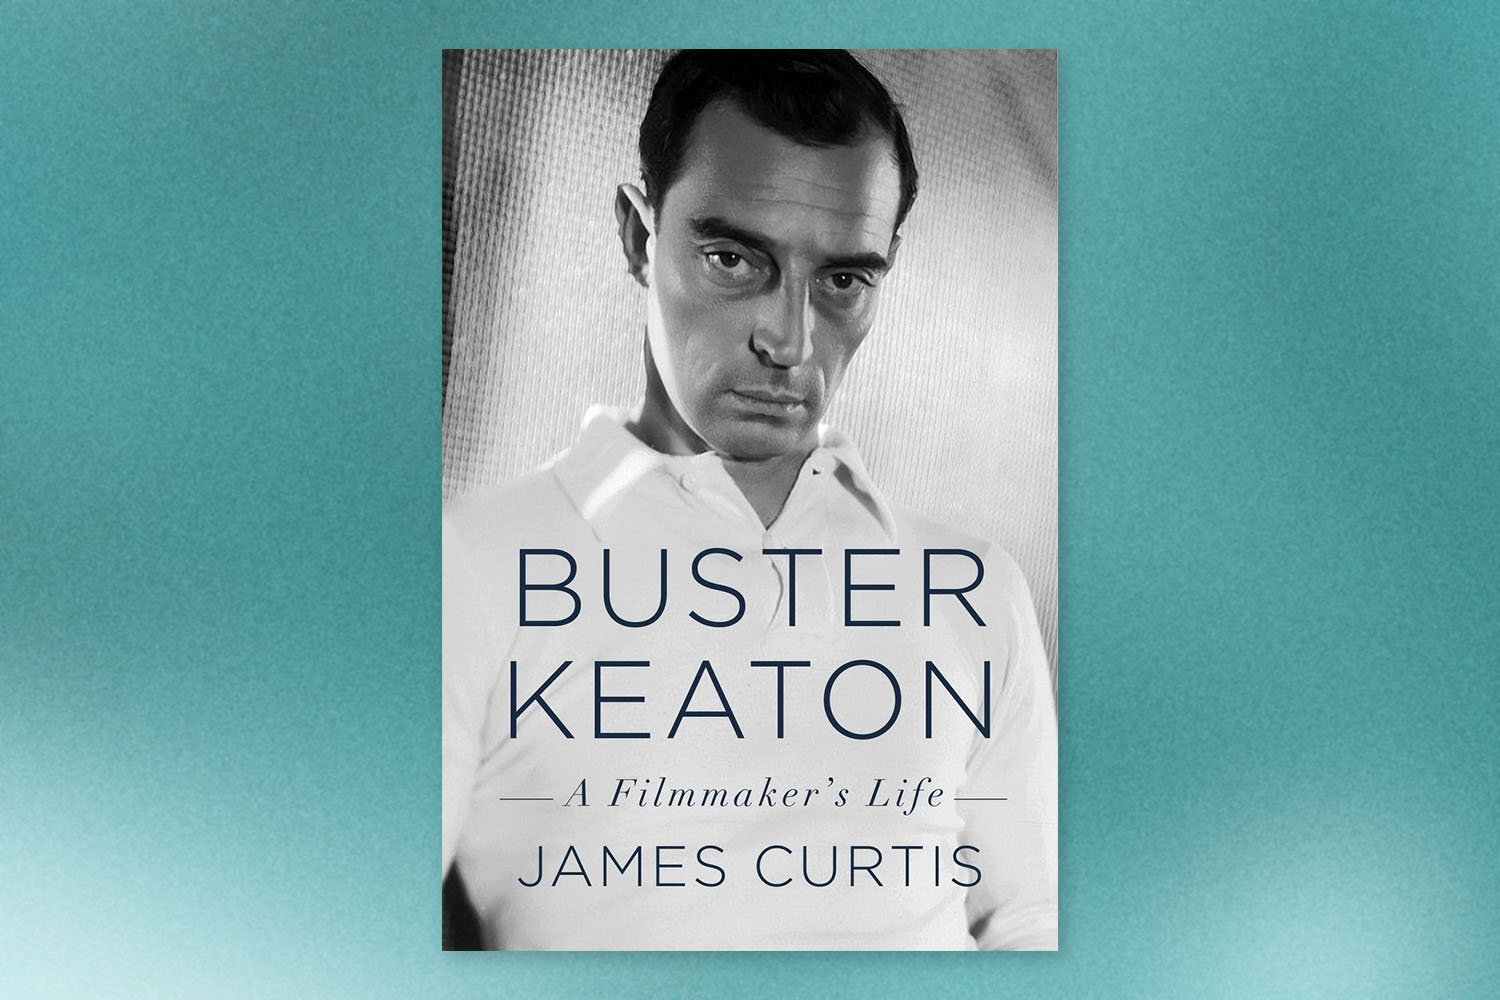 Buster Keaton book on blue background